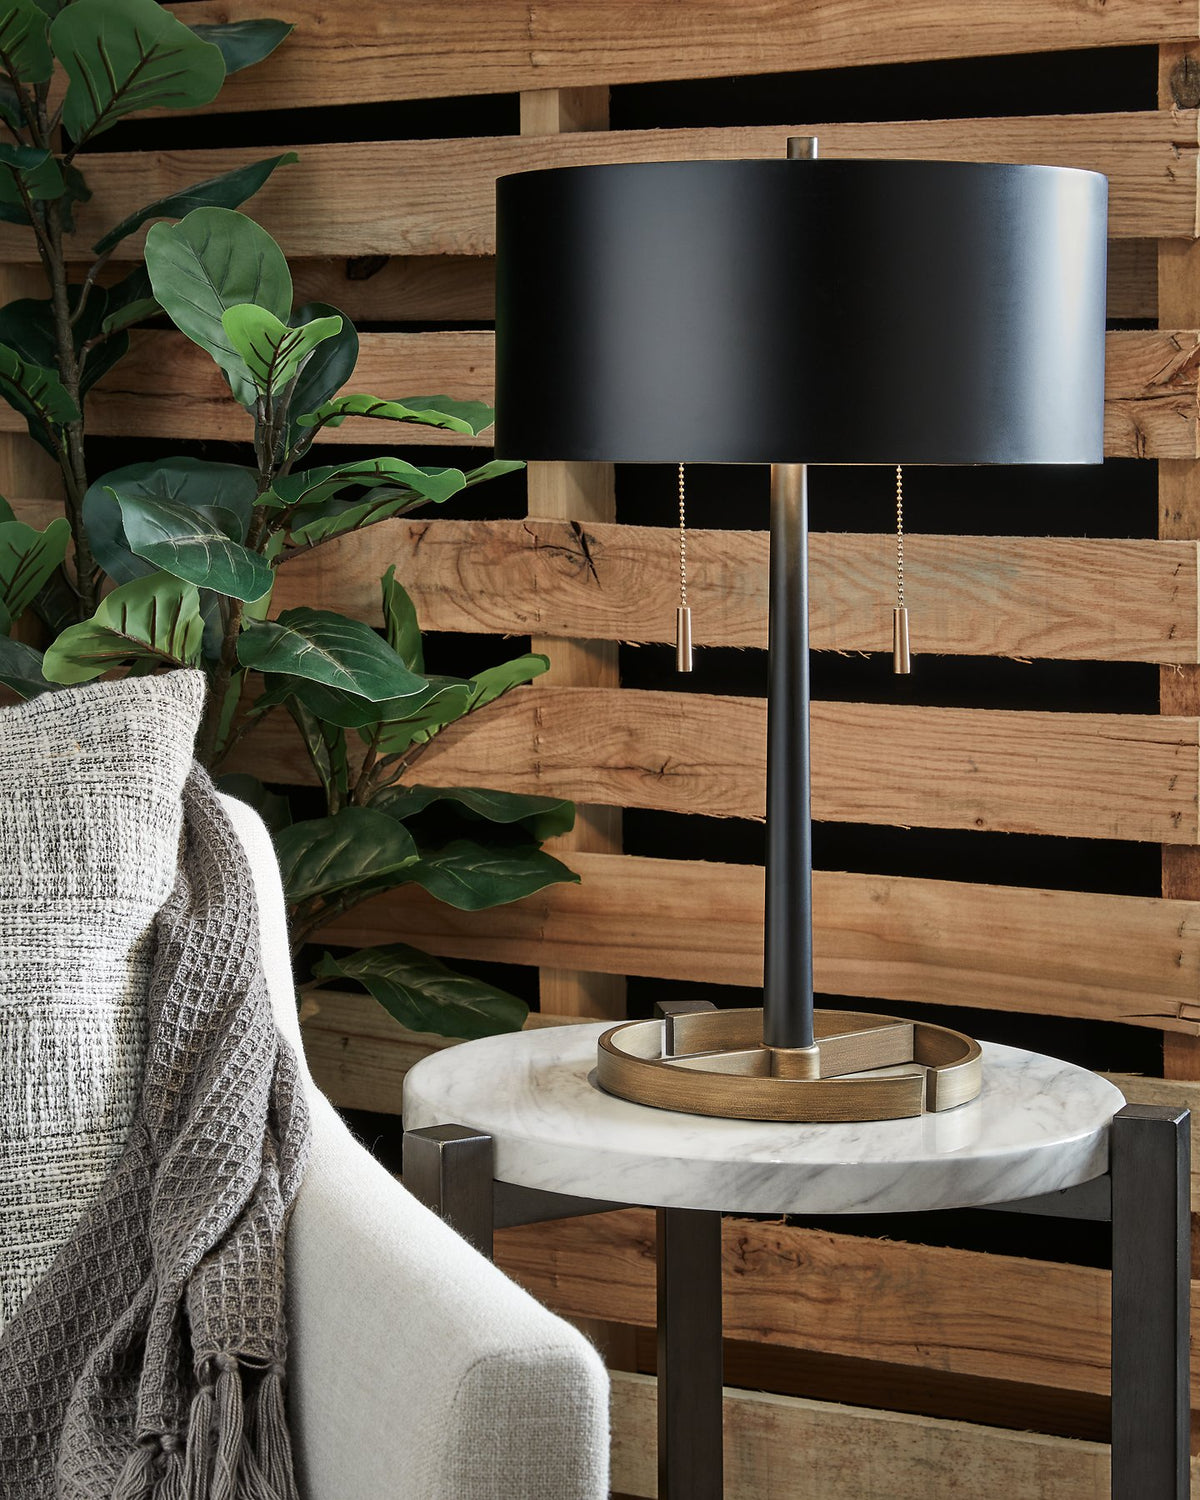 Amadell Table Lamp  Las Vegas Furniture Stores